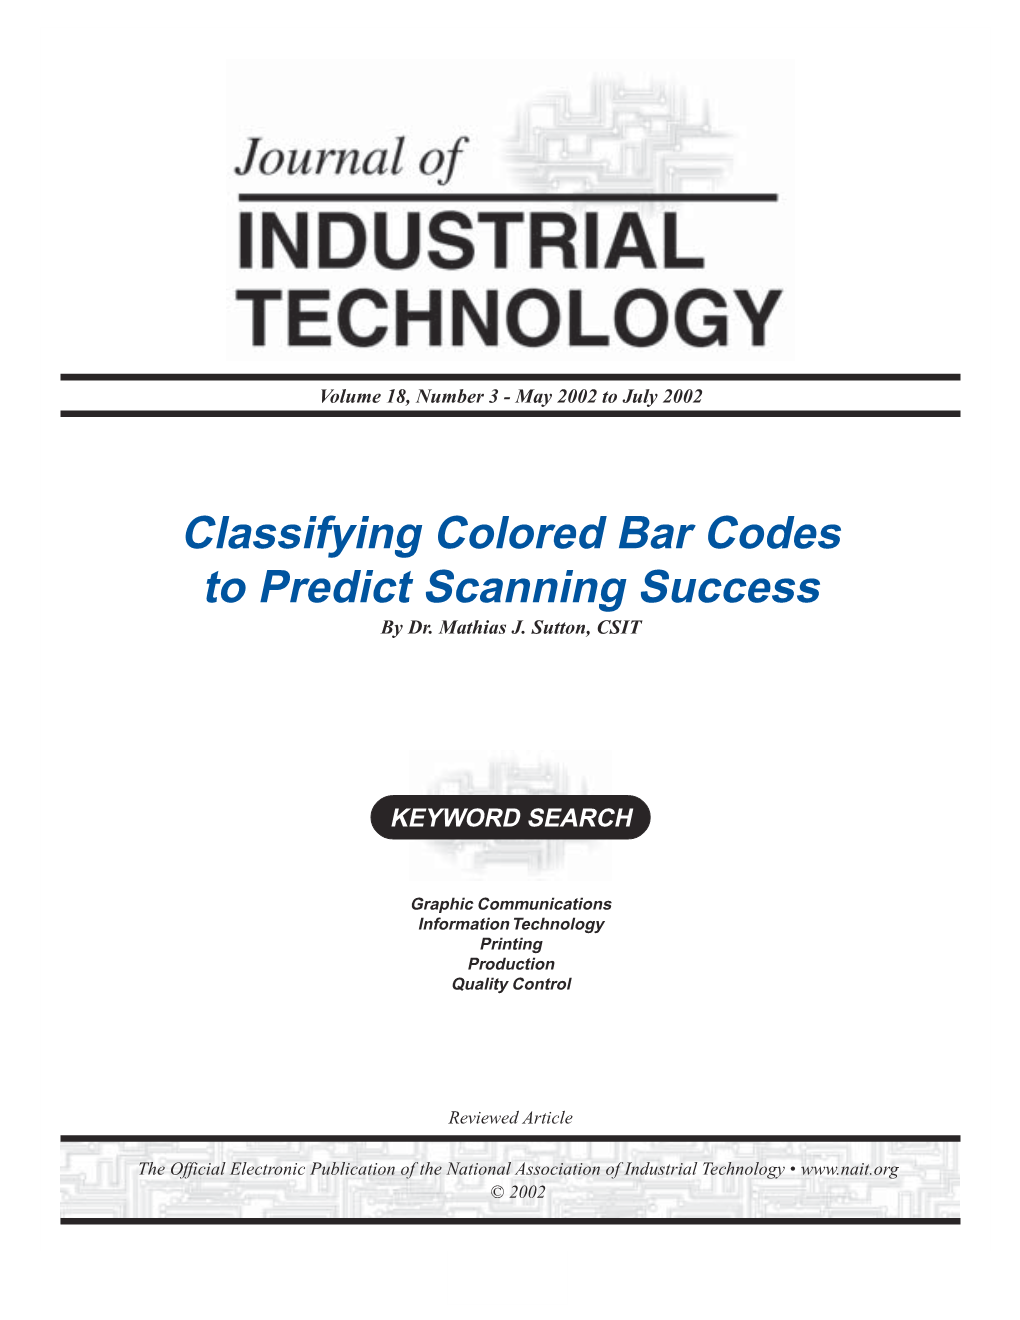 Classifying Colored Bar Codes to Predict Scanning Success by Dr